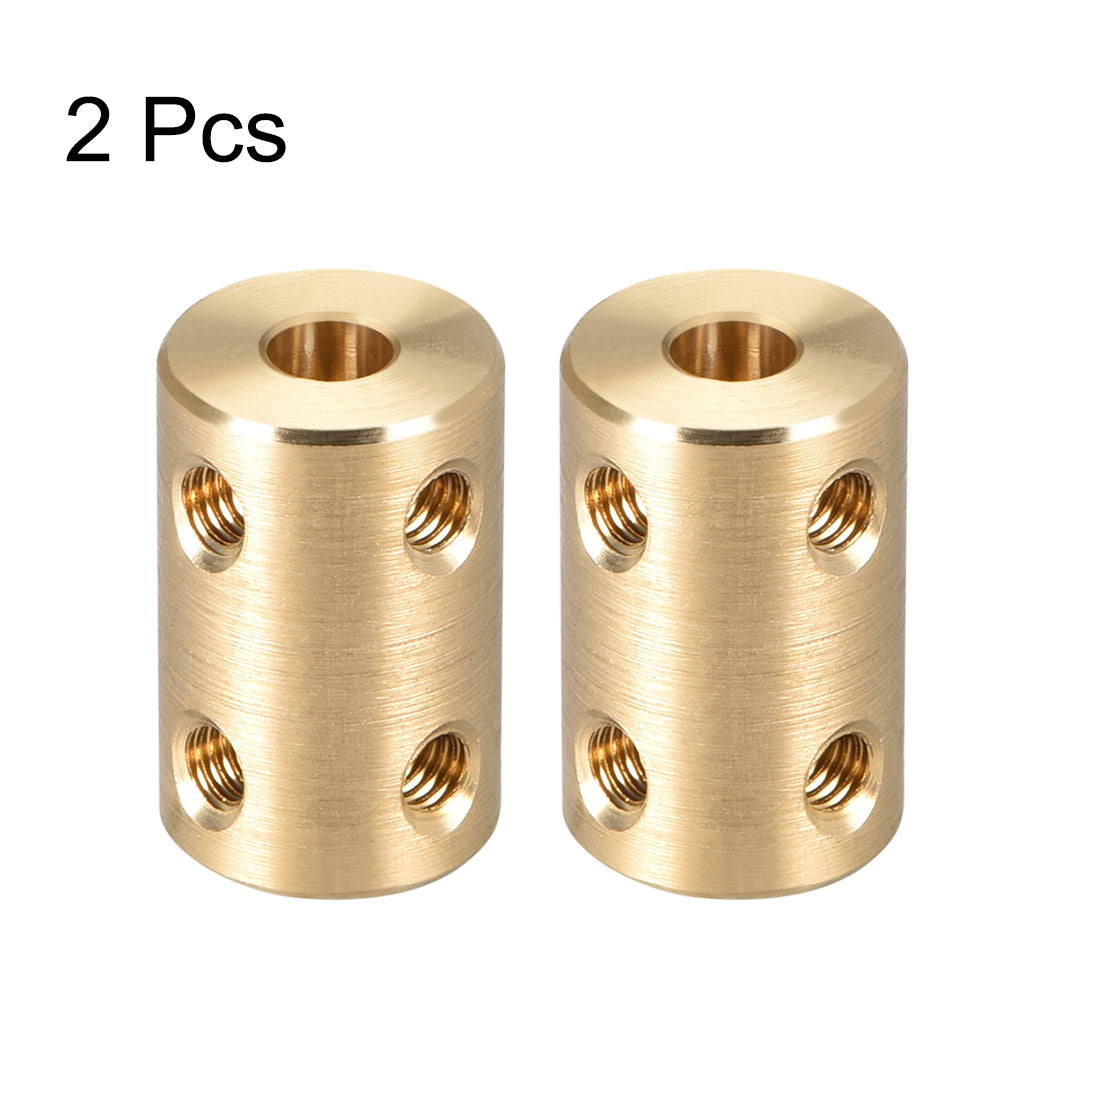 uxcell Uxcell Shaft Coupling 5mm to 5mm Bore L22xD14 Robot Motor Wheel Rigid Coupler Connector Gold Tone 2 Pcs